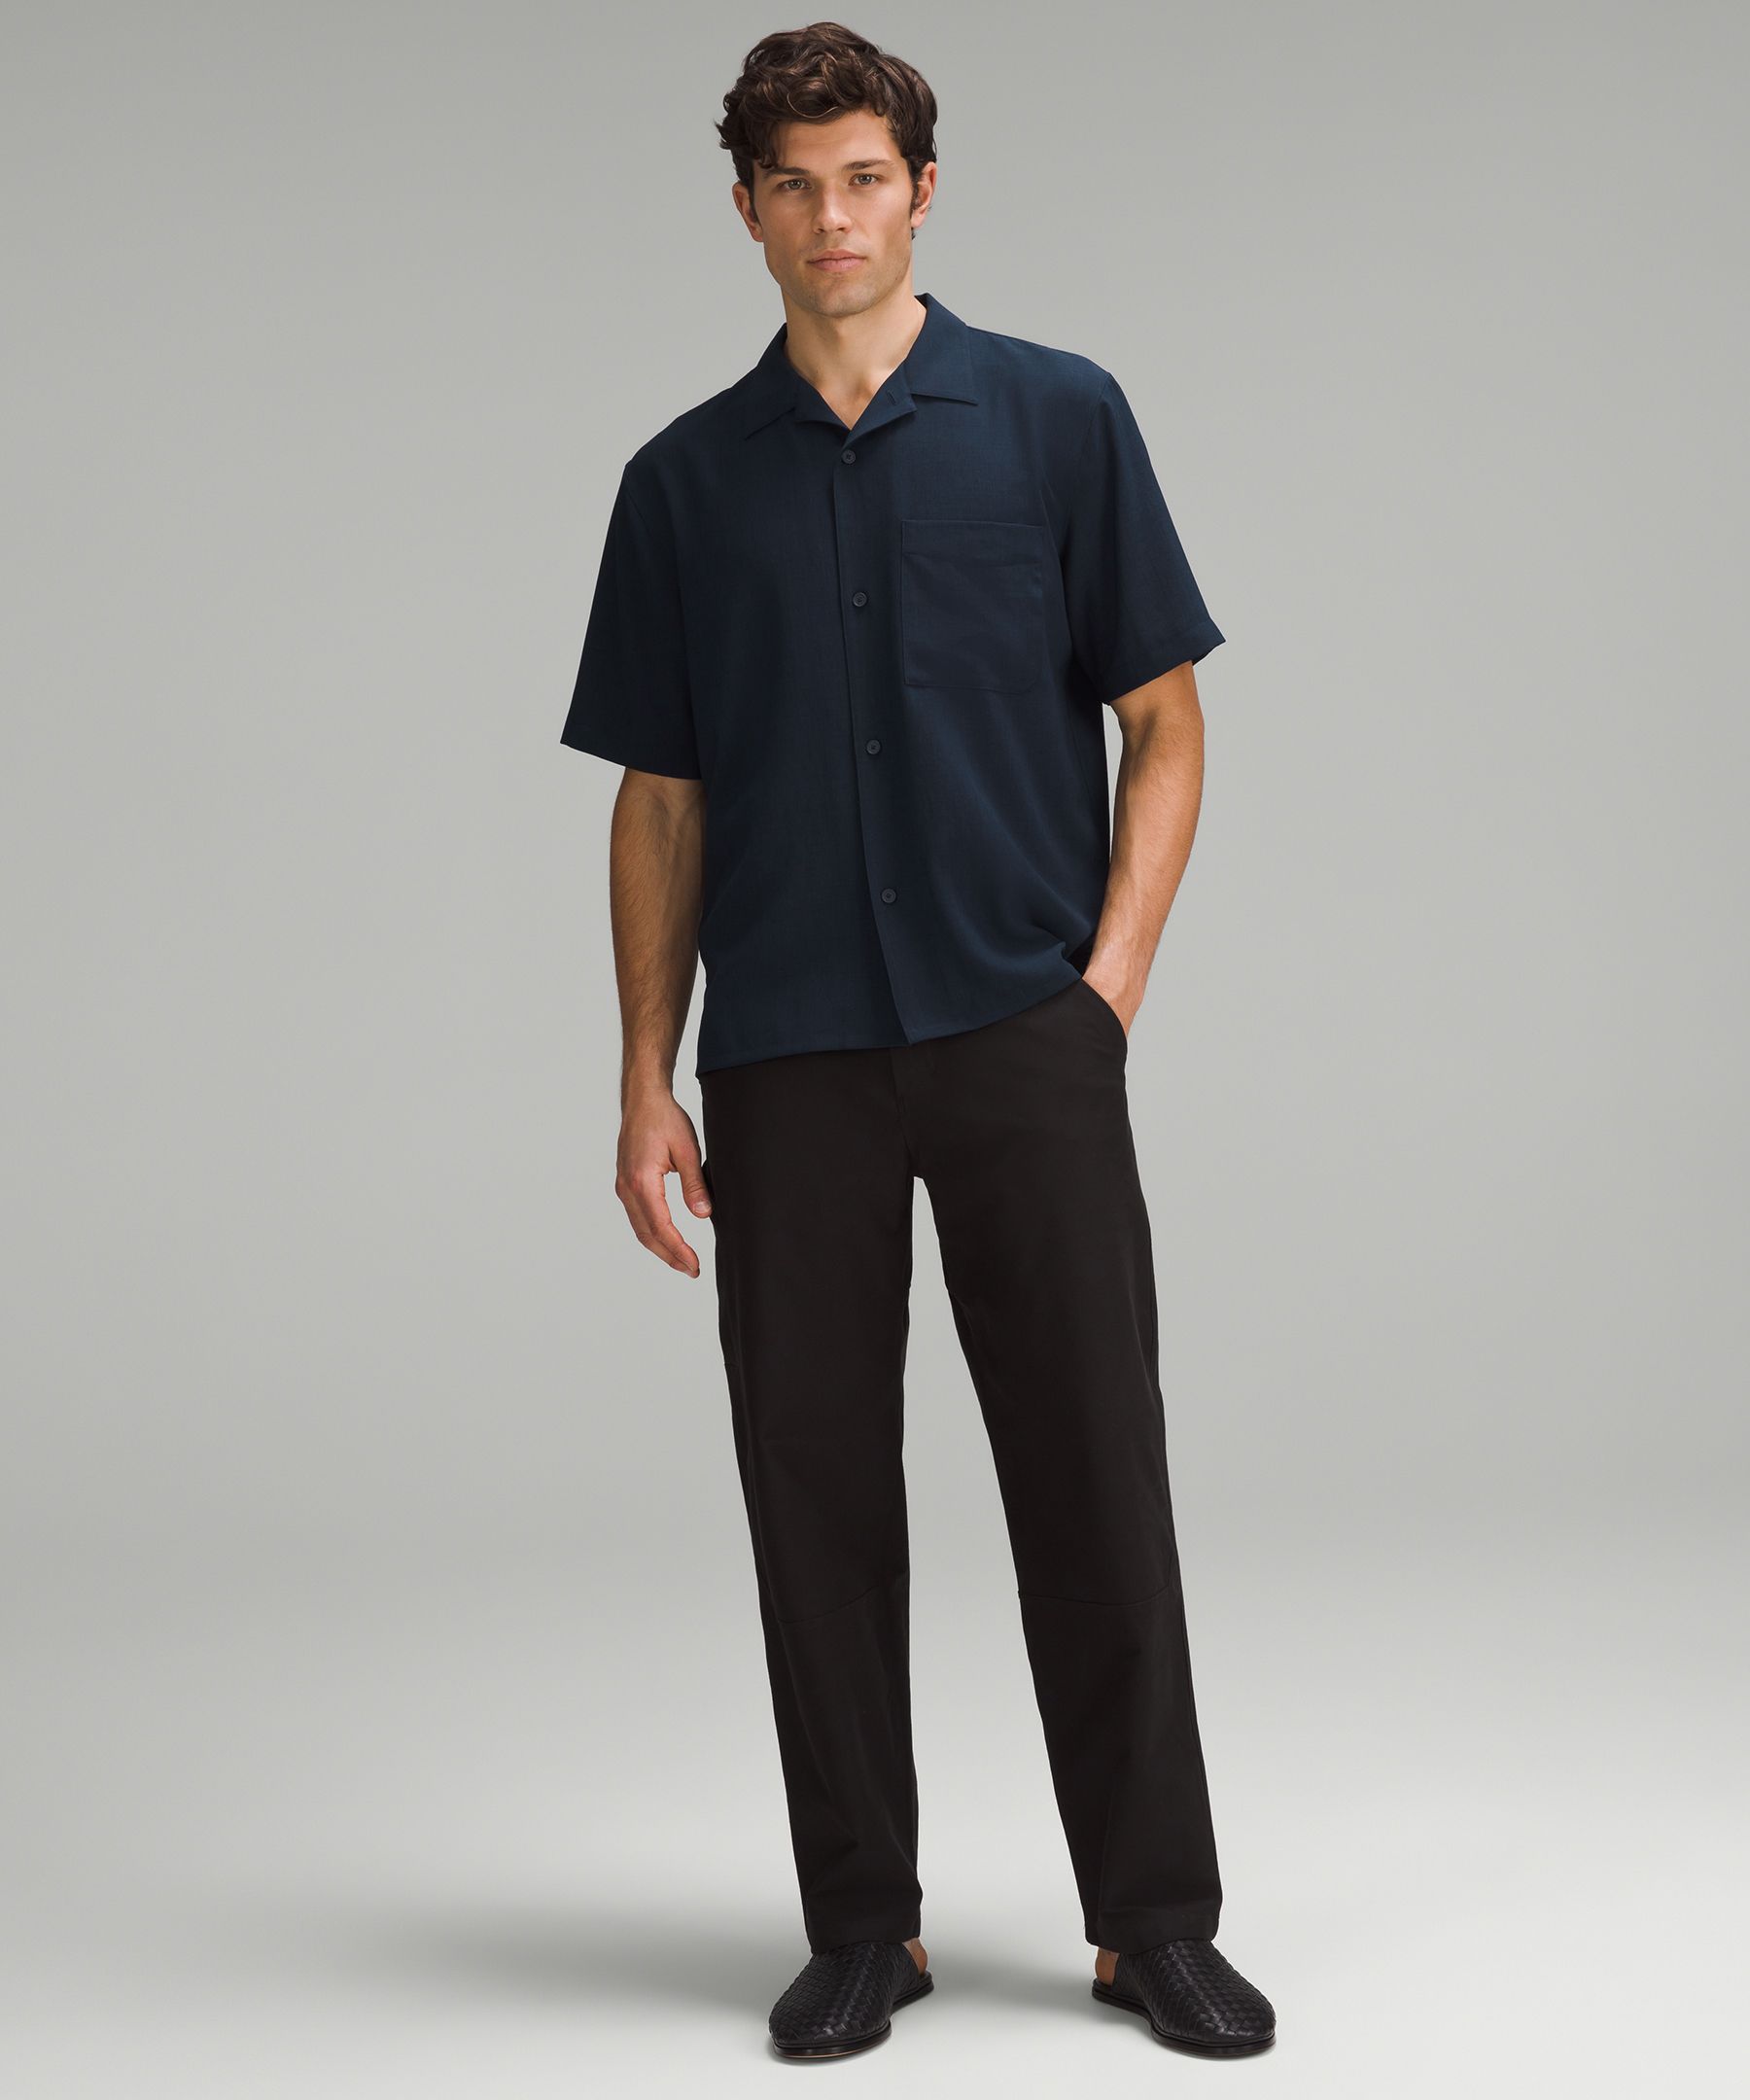 Men's Relaxed Fit Clothes | lululemon